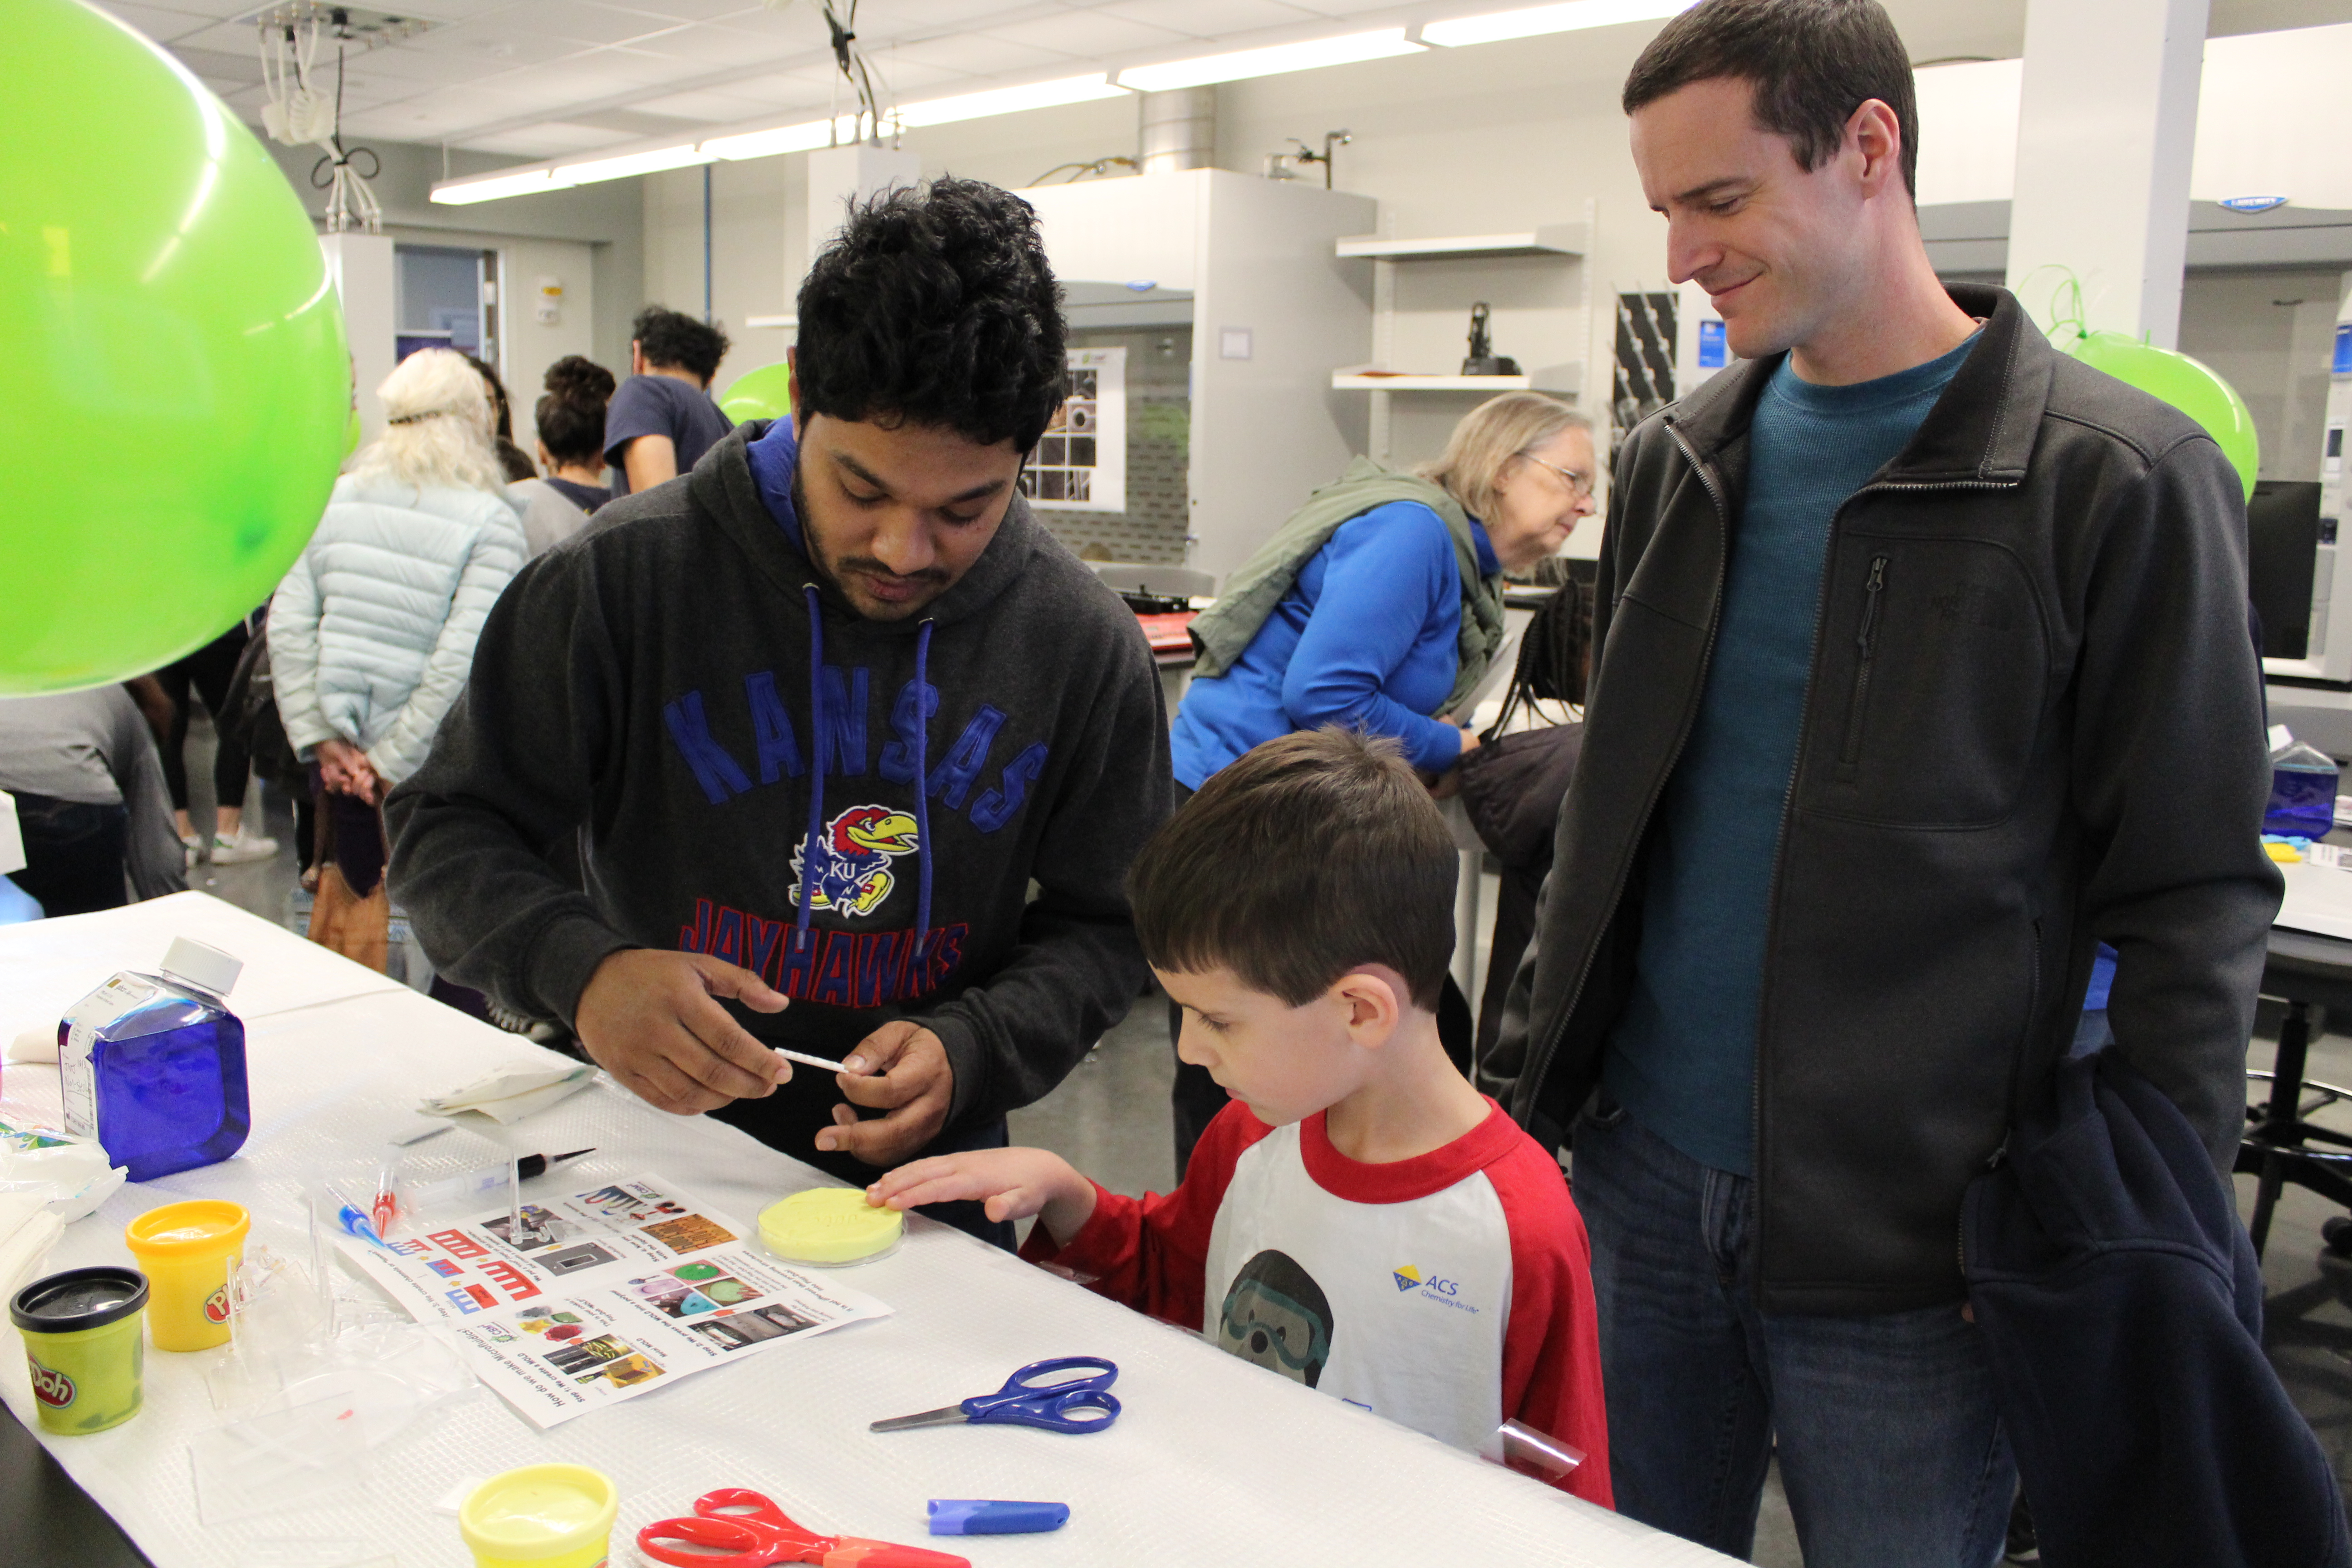 A University of Kansas student assisting a child with a craft activity.